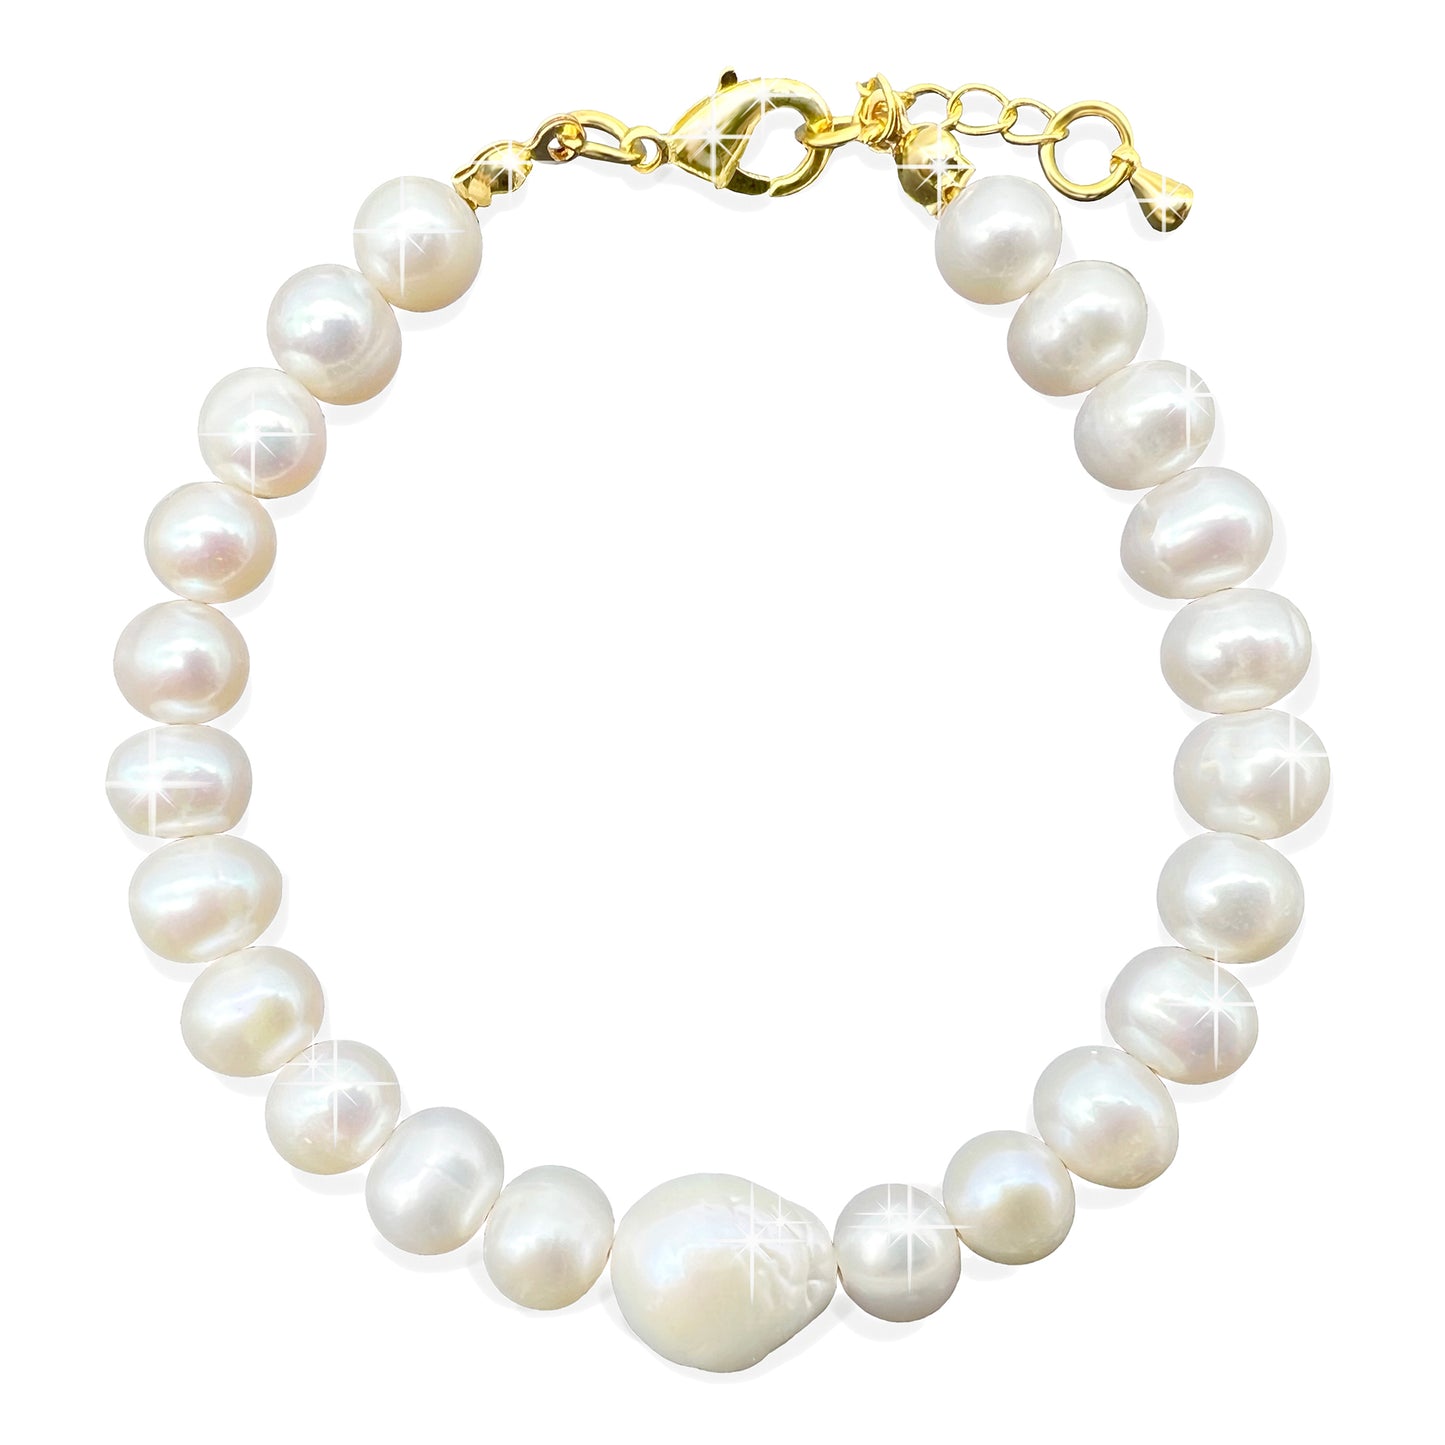 Beautiful Genuine Grade A High Luster White Baroque Pearl and Pearls, 18k Gold Plated Lobster Clasp, Protection, Love, Intuition, Wisdom, Abundance.